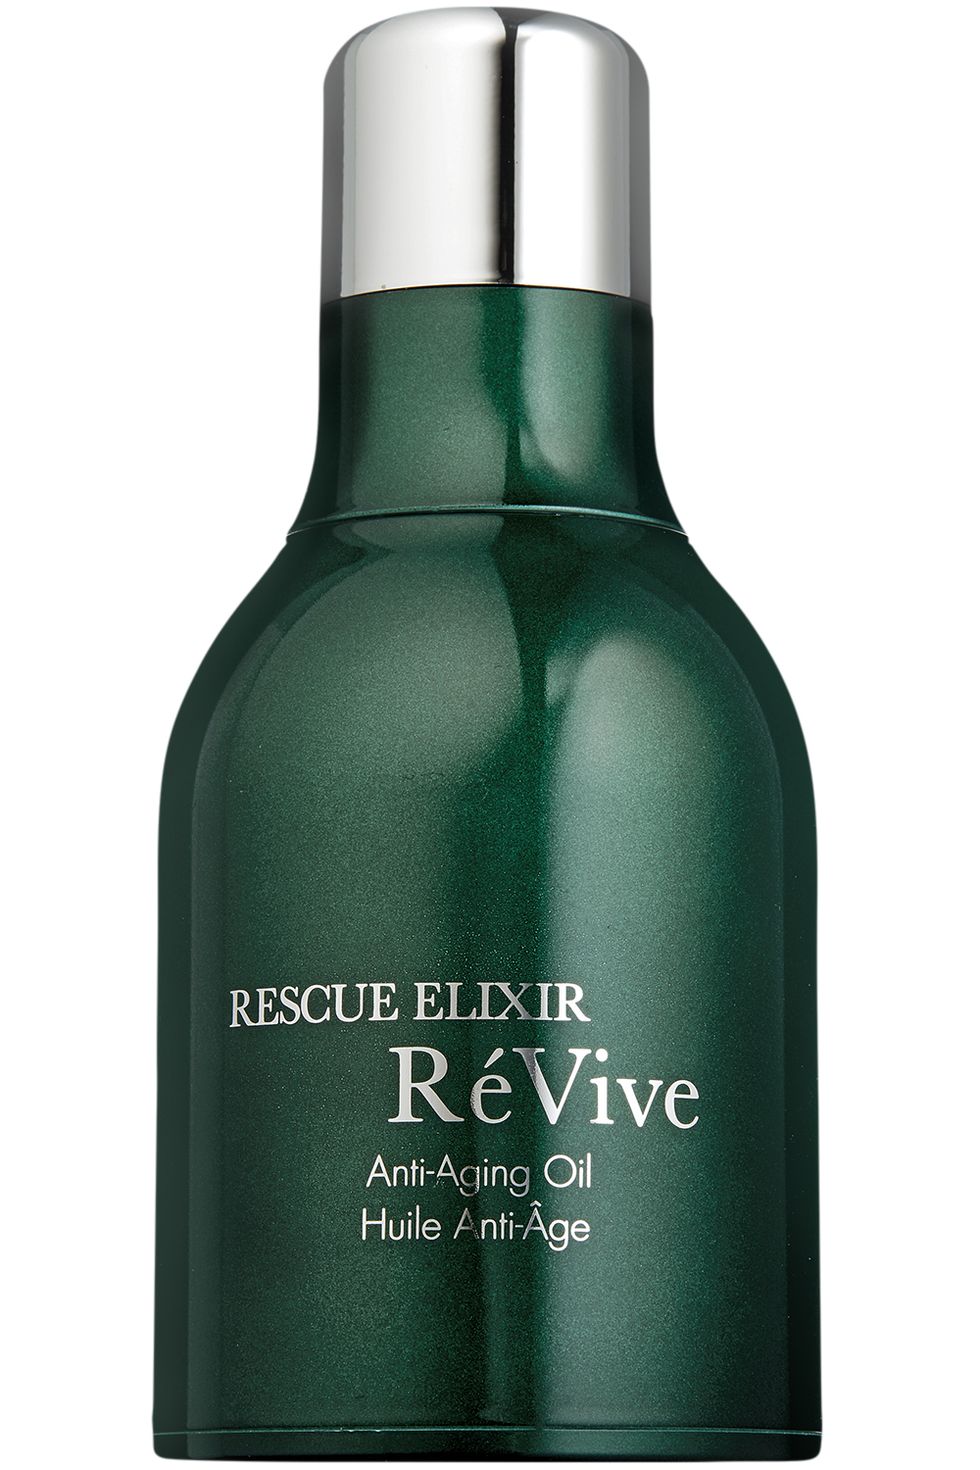 <p>Extra-dry skin requires a&nbsp;nighttime formula with&nbsp;rich ingredients like olive&nbsp;and coconut oils. Wake&nbsp;up to a softer, more&nbsp;supple complexion.</p><p><a href="http://www.barneys.com/product/r-c3-a9vive-rescue-elixir-anti-aging-oil-504841025.html" target="_blank" data-tracking-id="recirc-text-link">RéVive Rescue Elixir Anti-Aging Oil</a> ($285).</p>